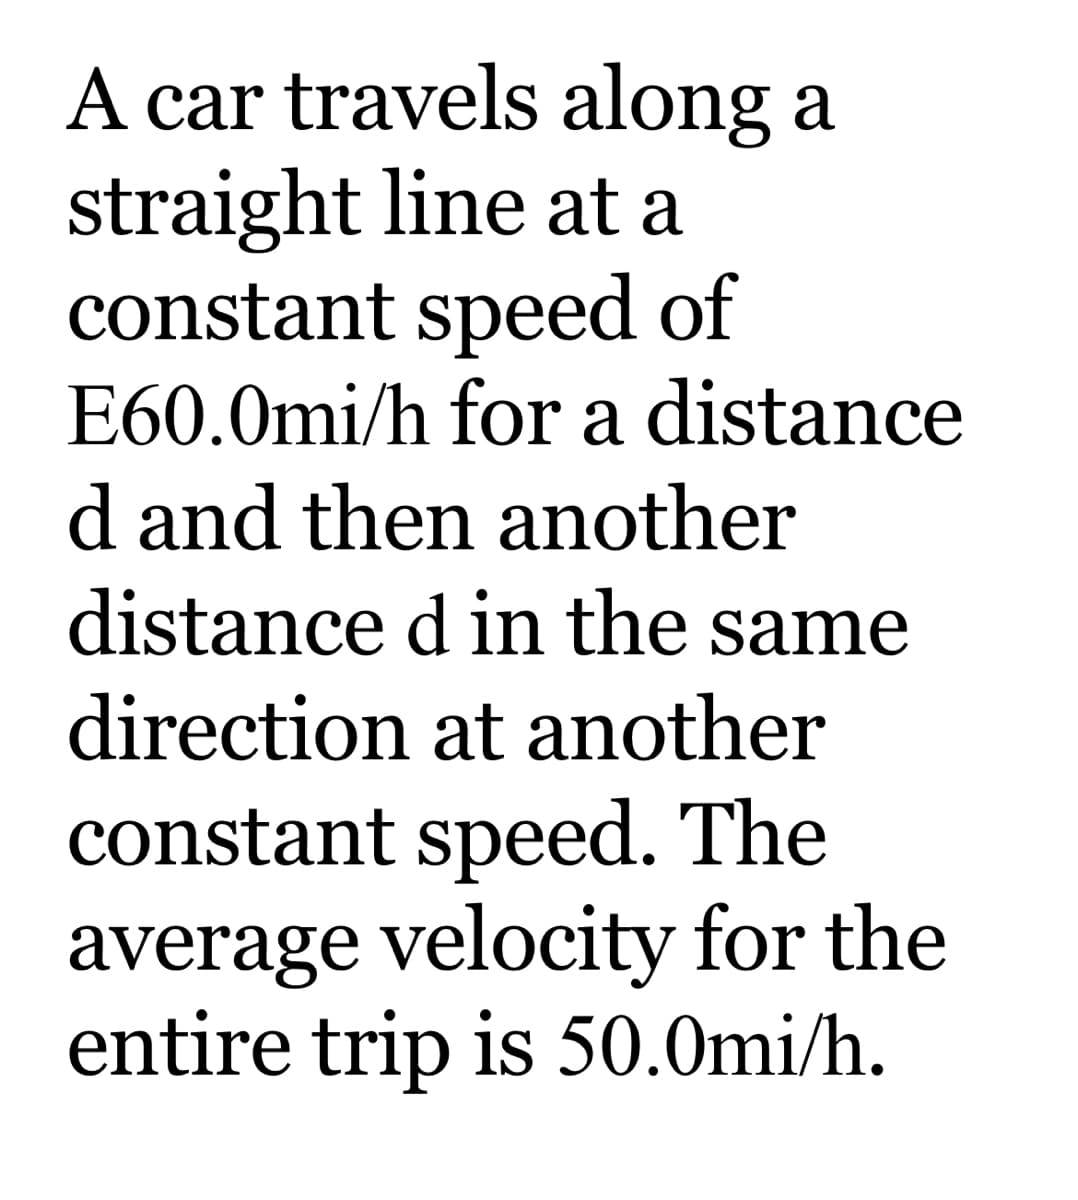 A car travels along a
straight line at a
constant speed of
E60.0mi/h for a distance
d and then another
distance d in the same
direction at another
constant speed. The
average velocity for the
entire trip is 50.0mi/h.